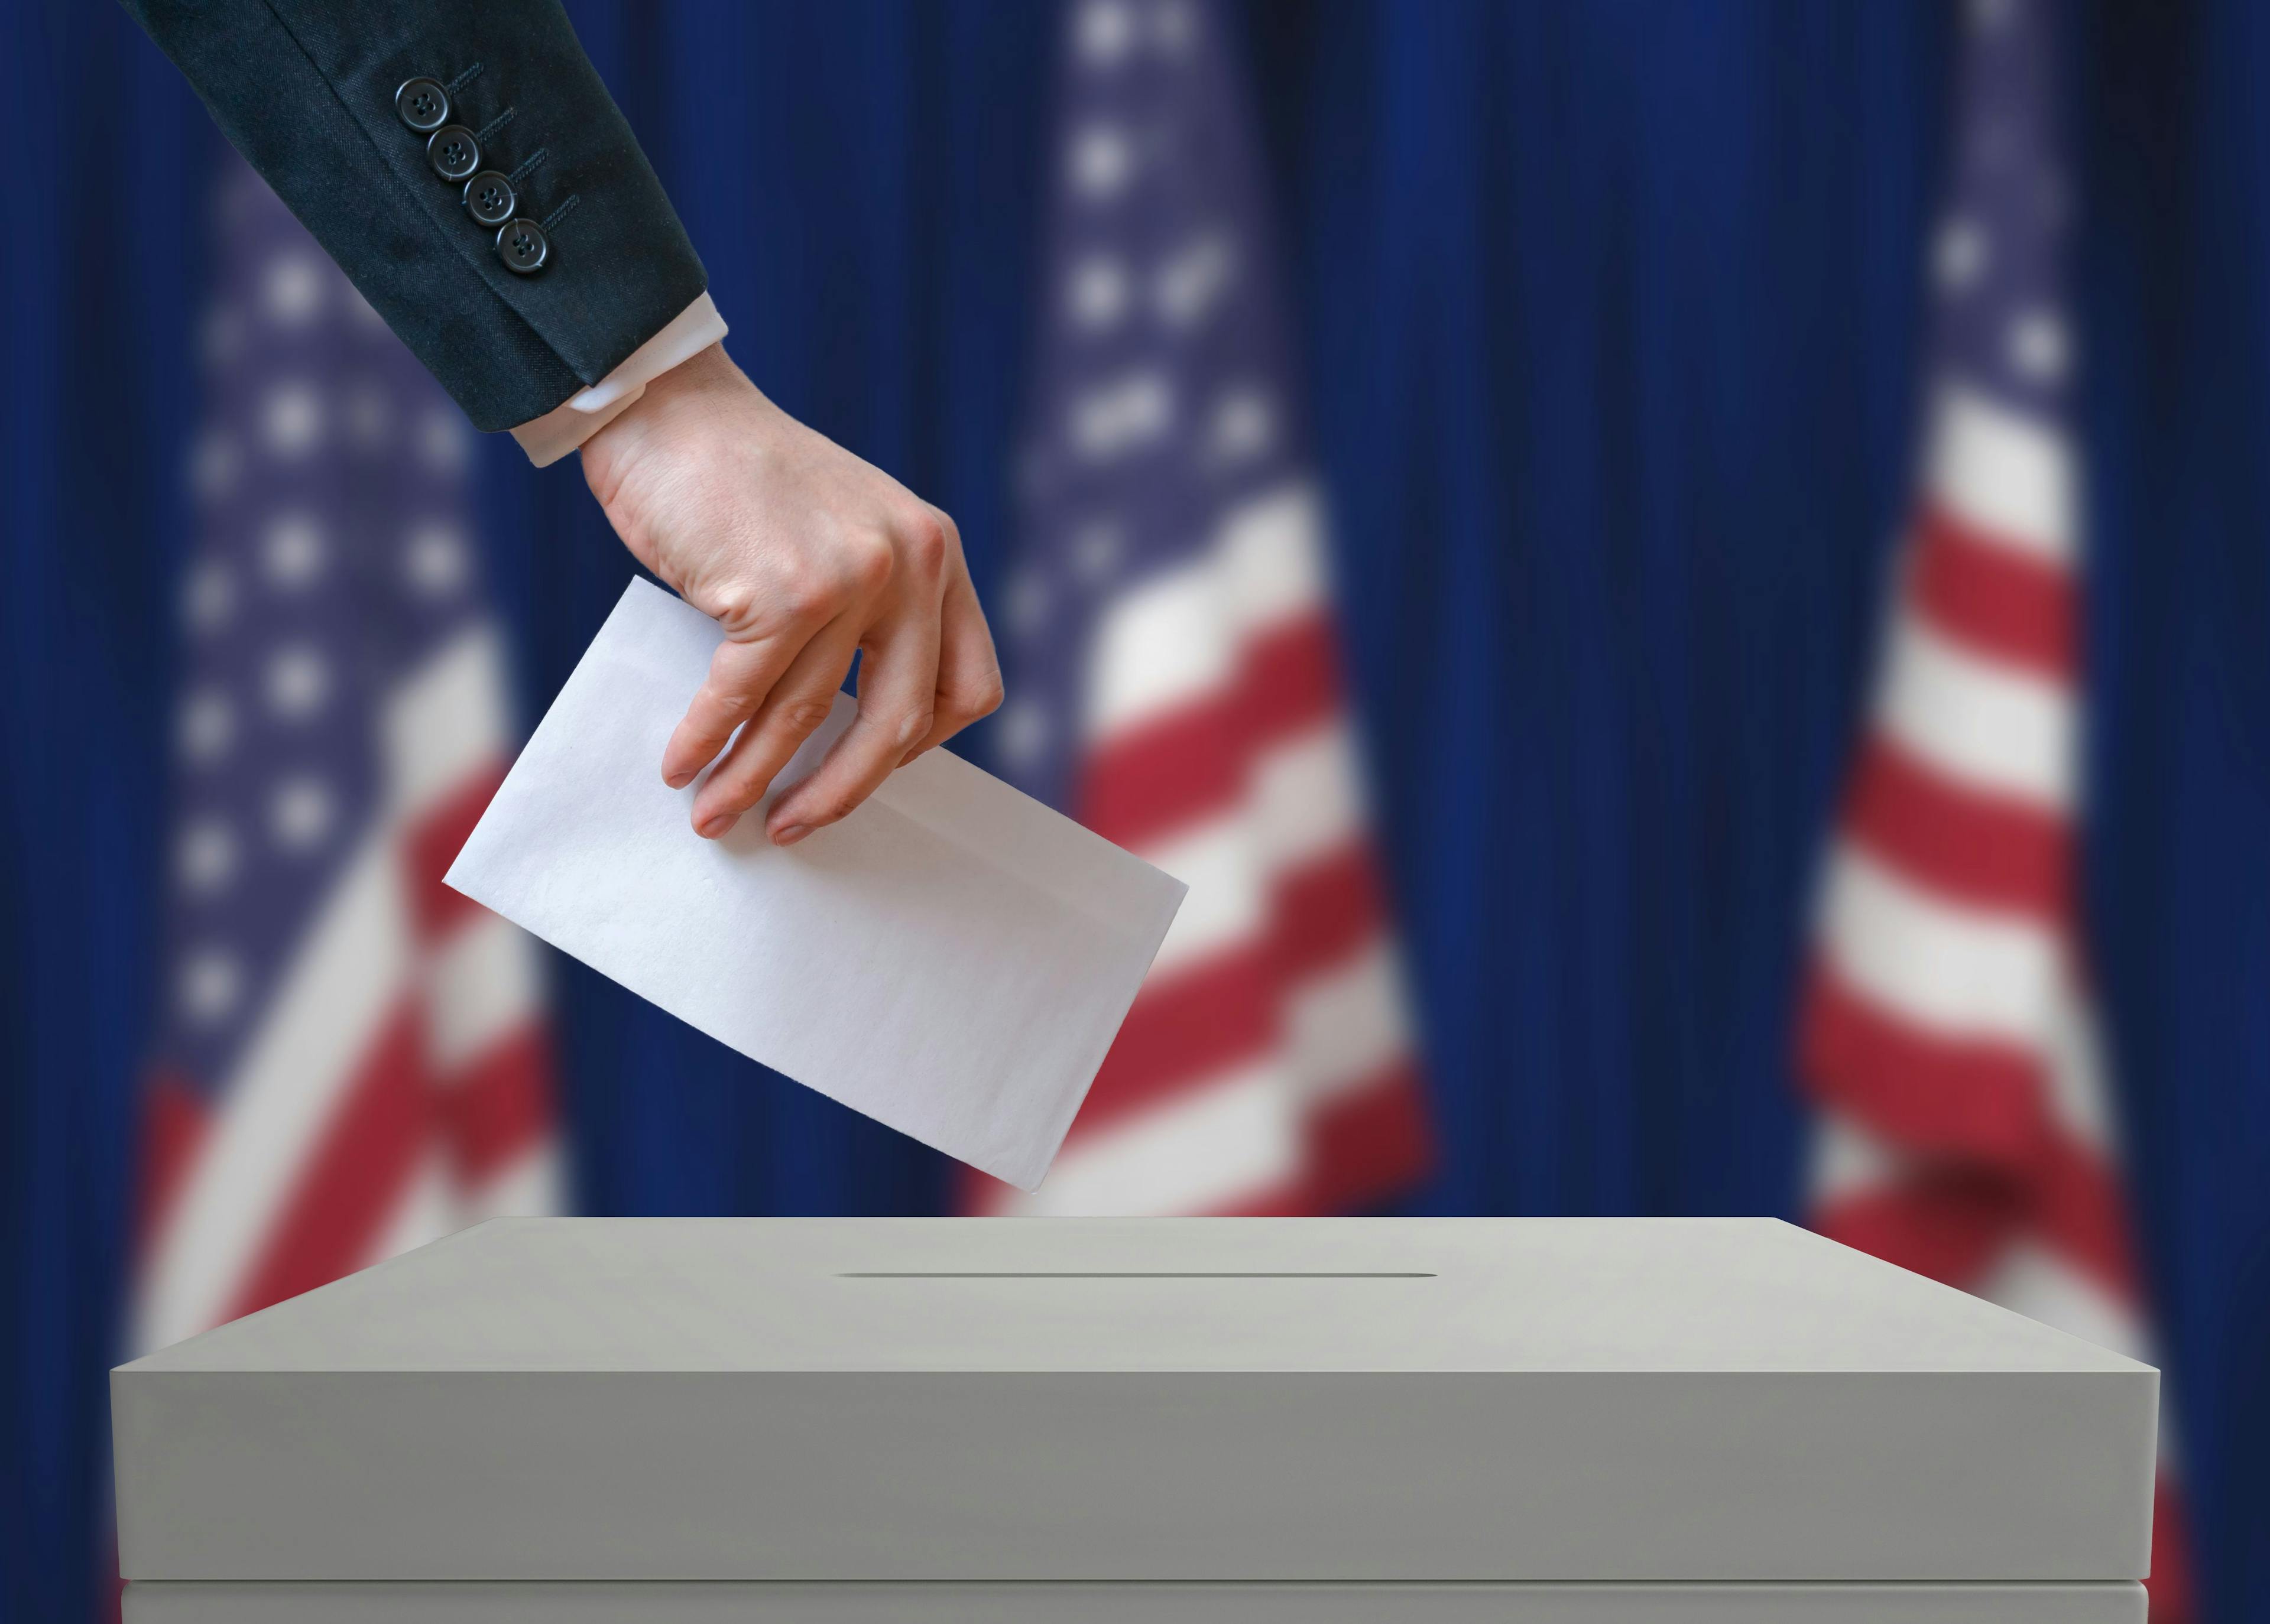 Pharmacists are closely watching the outcome of the 2024 presidental election. | image credit: vchalup - stock.adobe.com